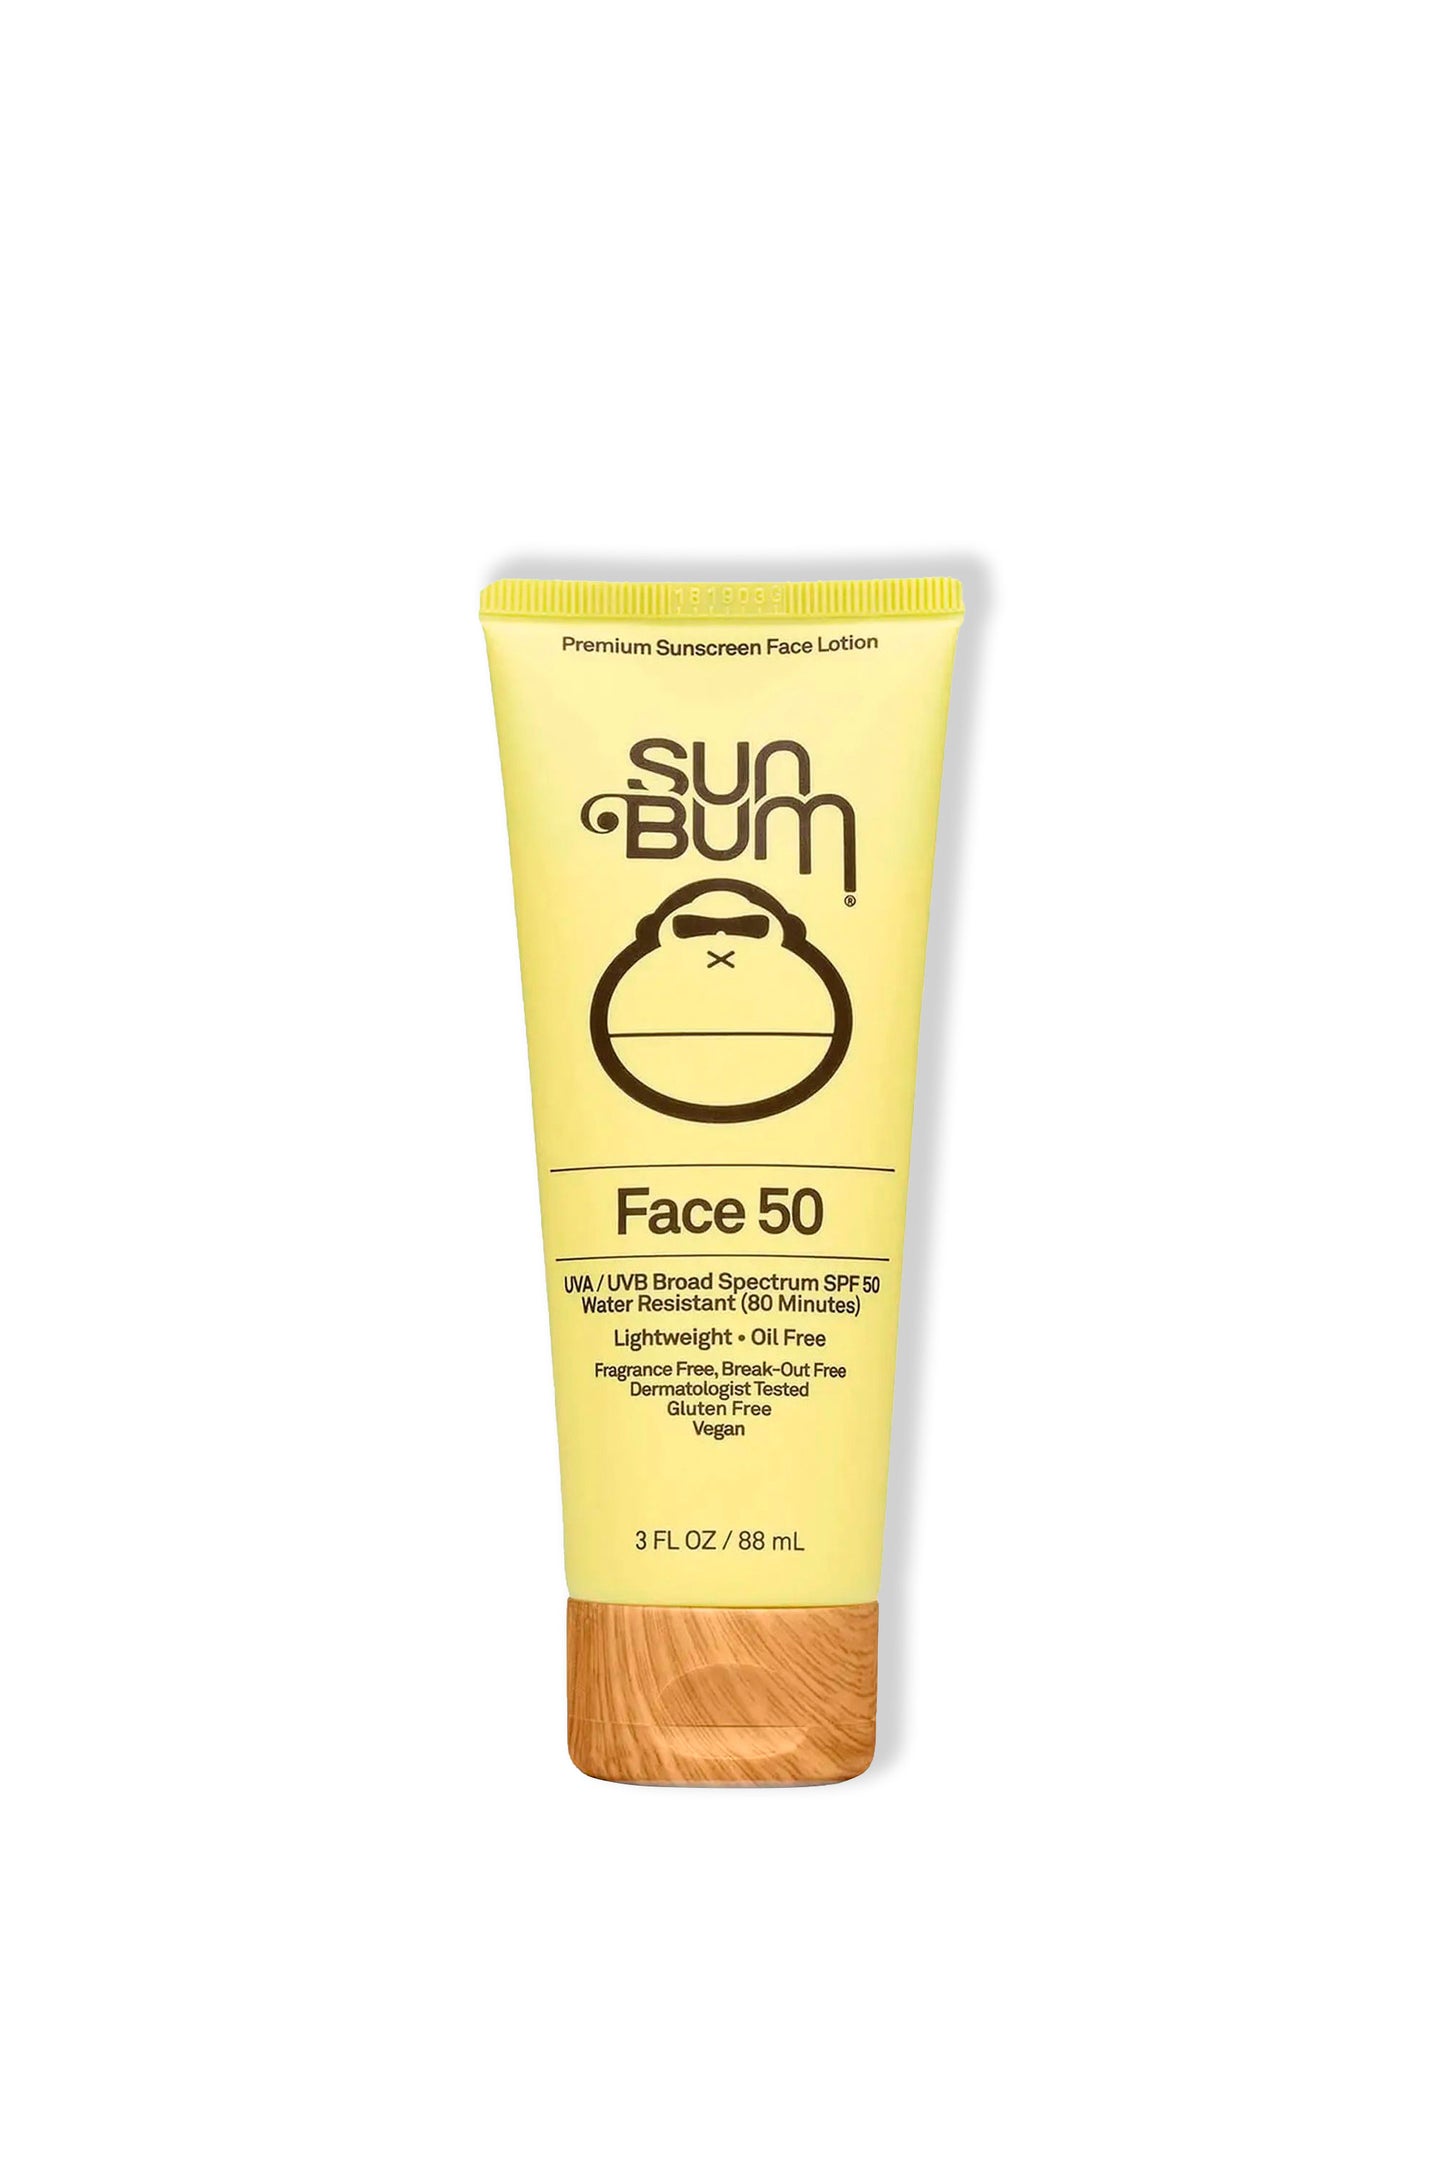 CLEAR FACE® Sunscreen Lotion